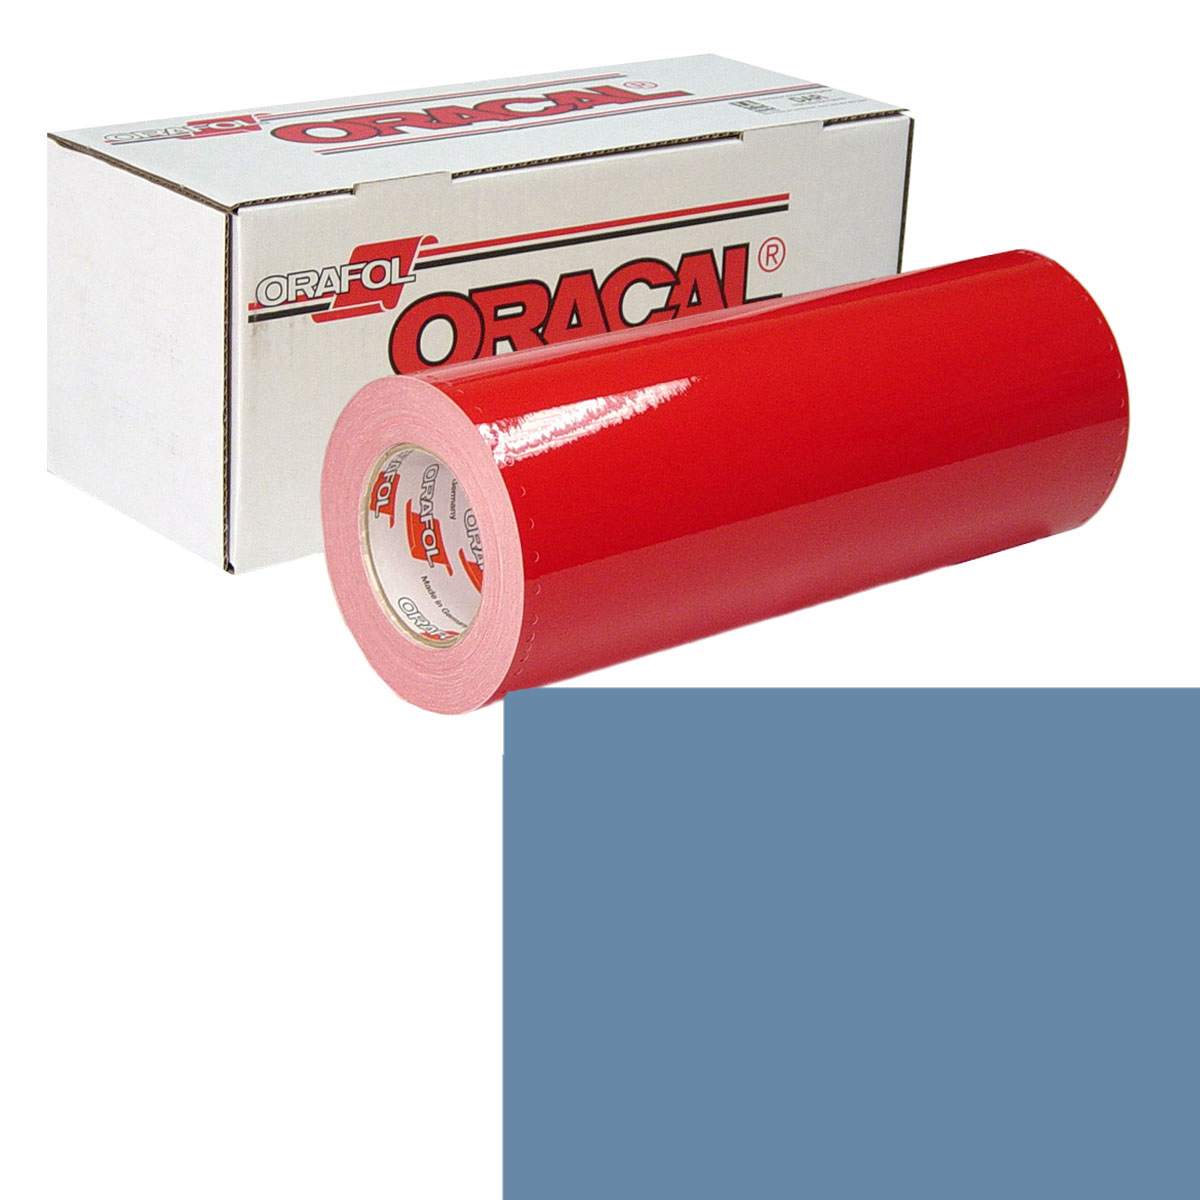 ORACAL 951 30in X 10yd 549 Dove Blue